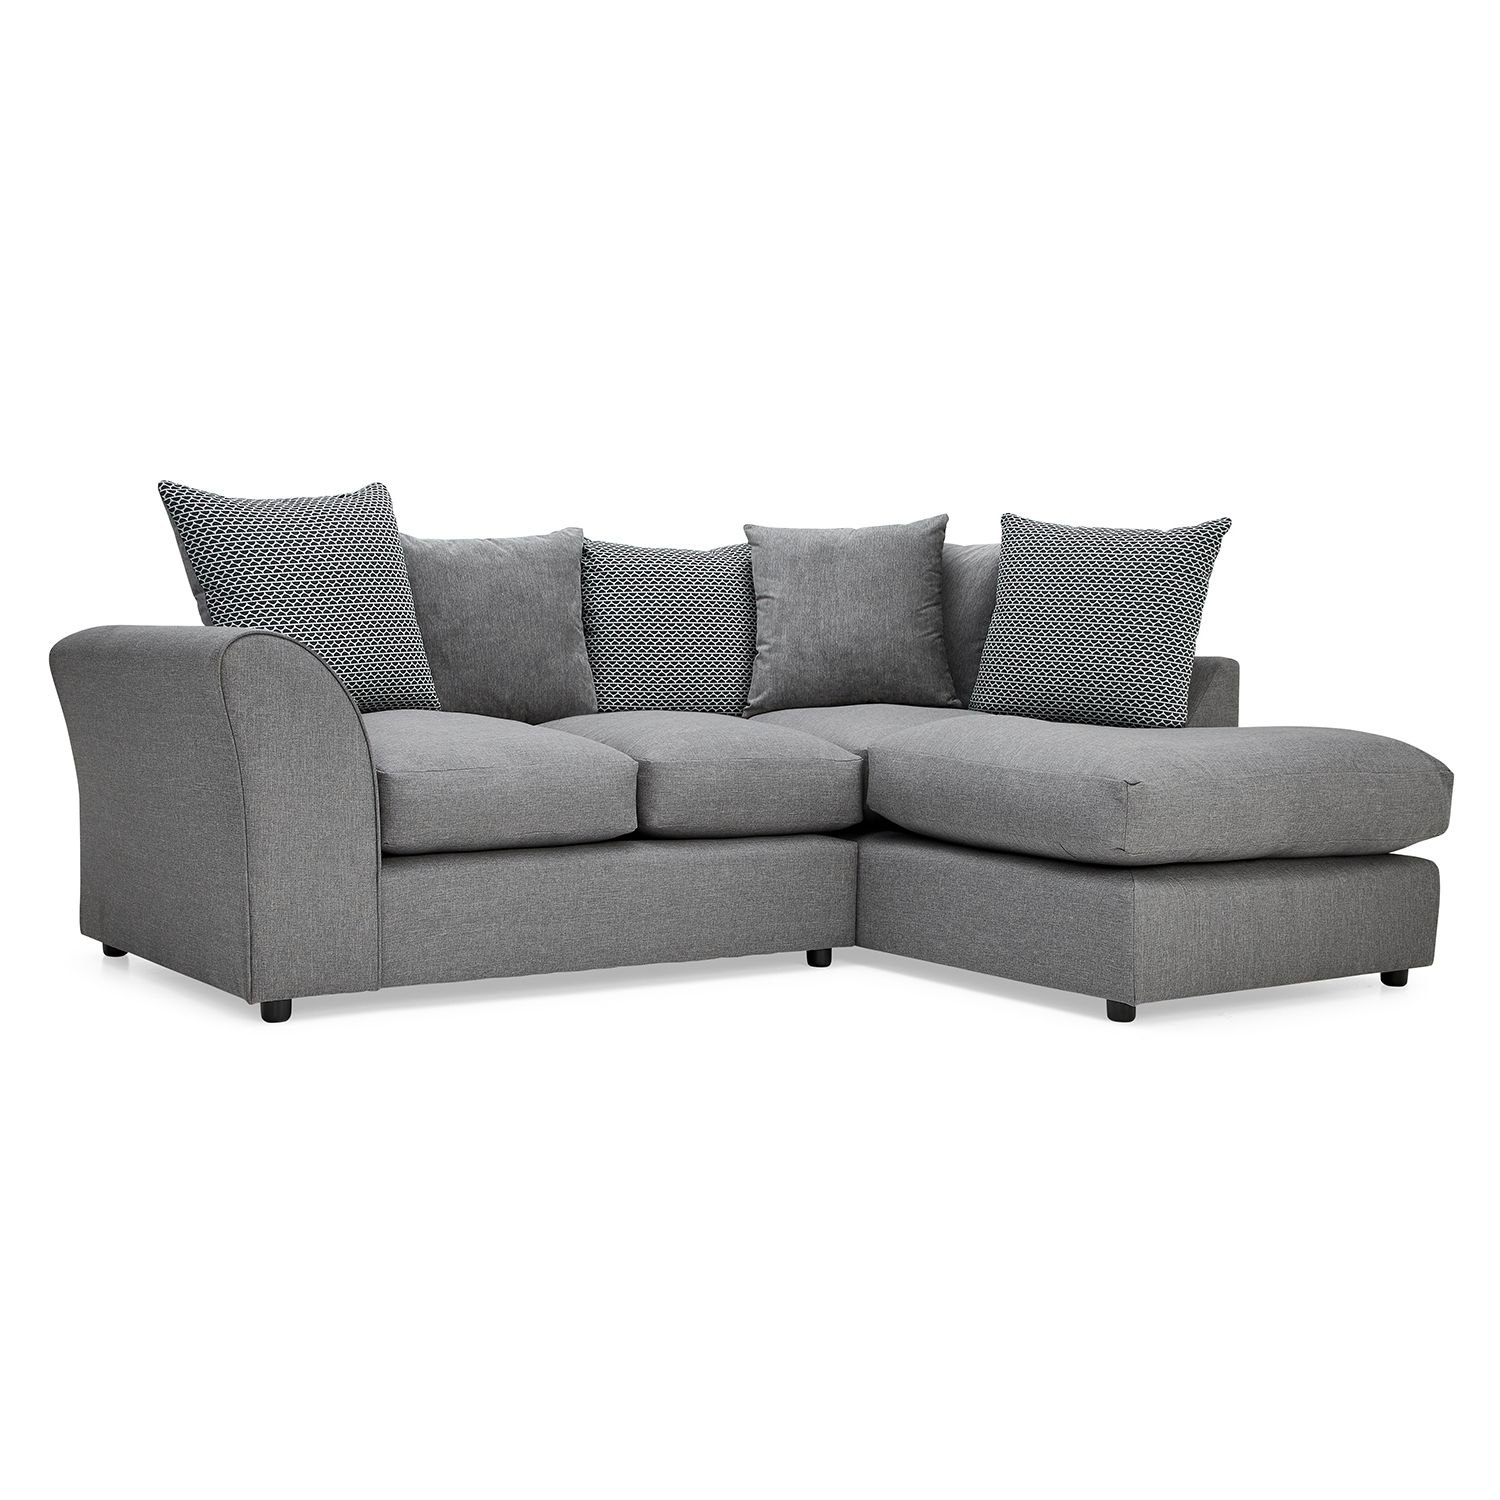 Well Known Fabric Corner Sofas Inside Seattle Fabric Corner Sofa – Next Day Delivery Seattle Fabric (View 9 of 15)